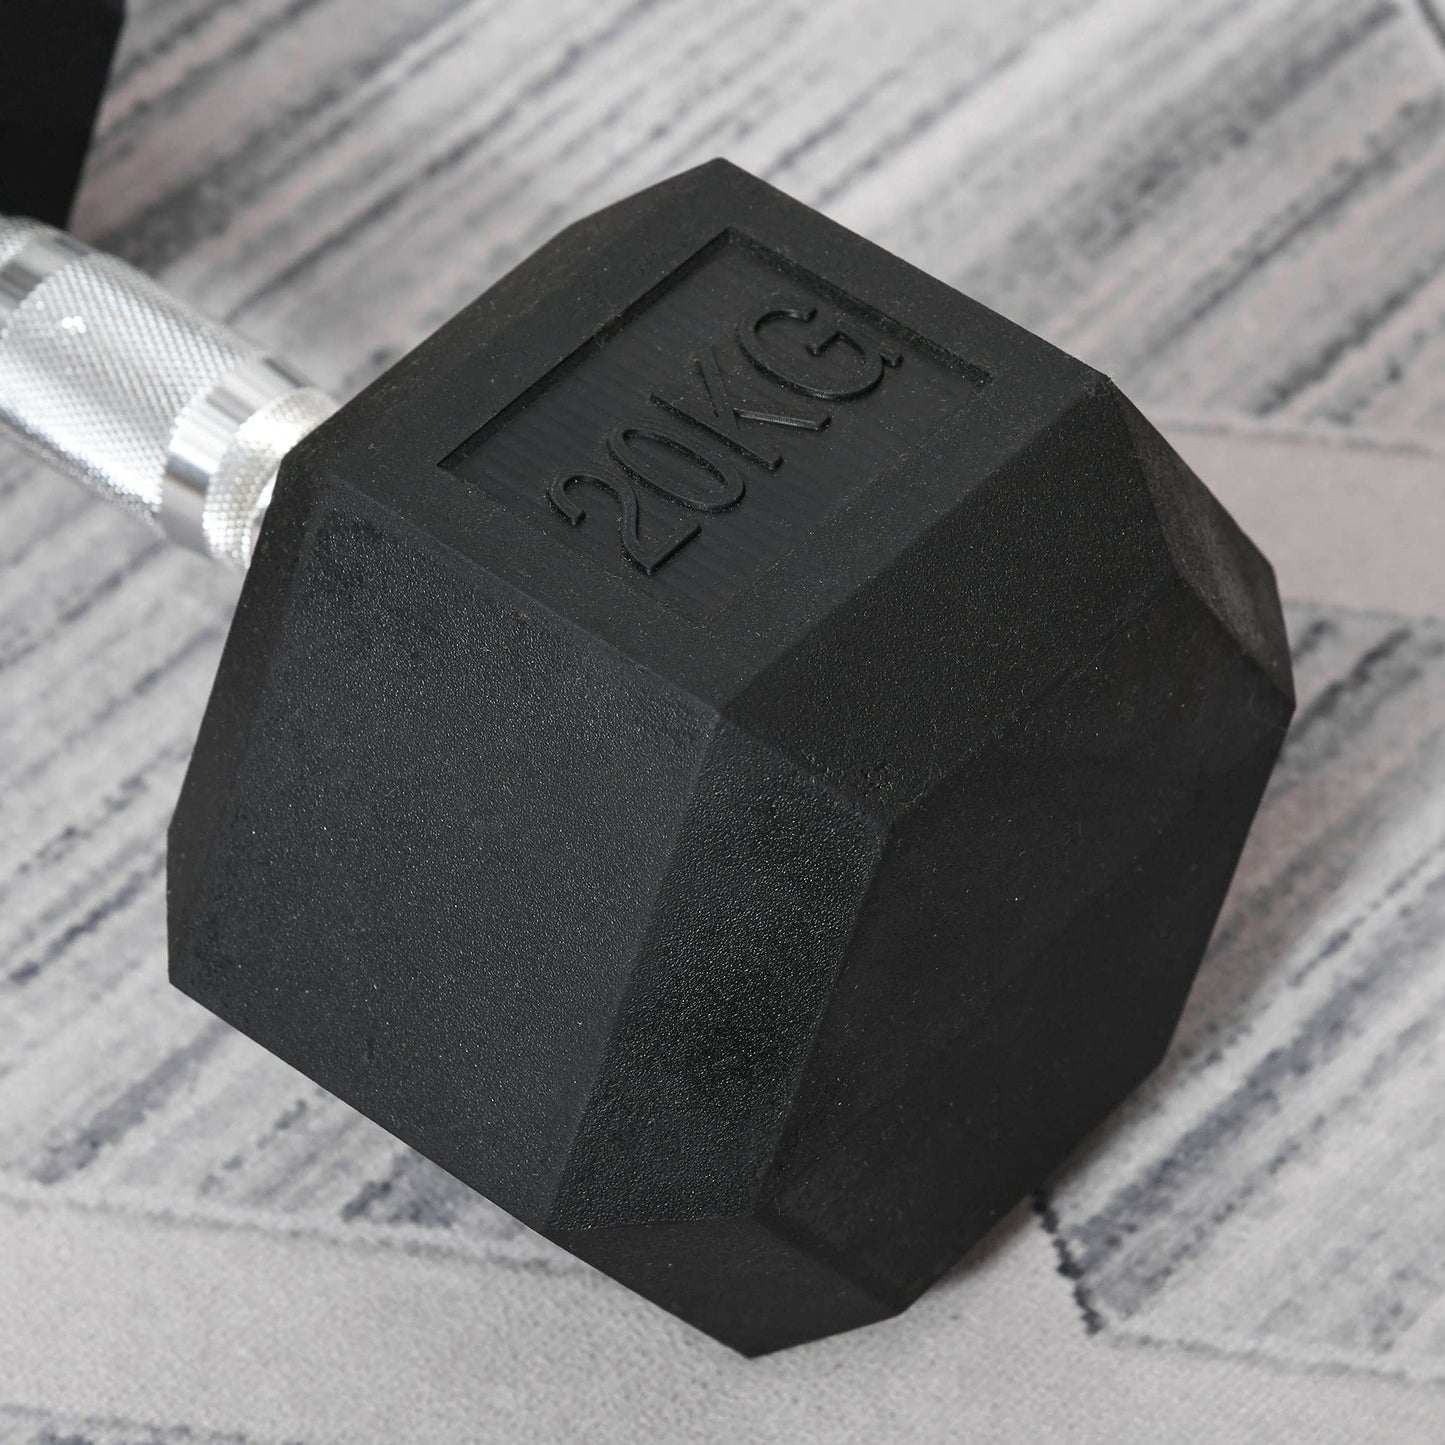 HOMCOM 12.5KG Single Rubber Hex Dumbbell Portable Hand Weights Dumbbell Home Gym Workout Fitness Hand Dumbbell